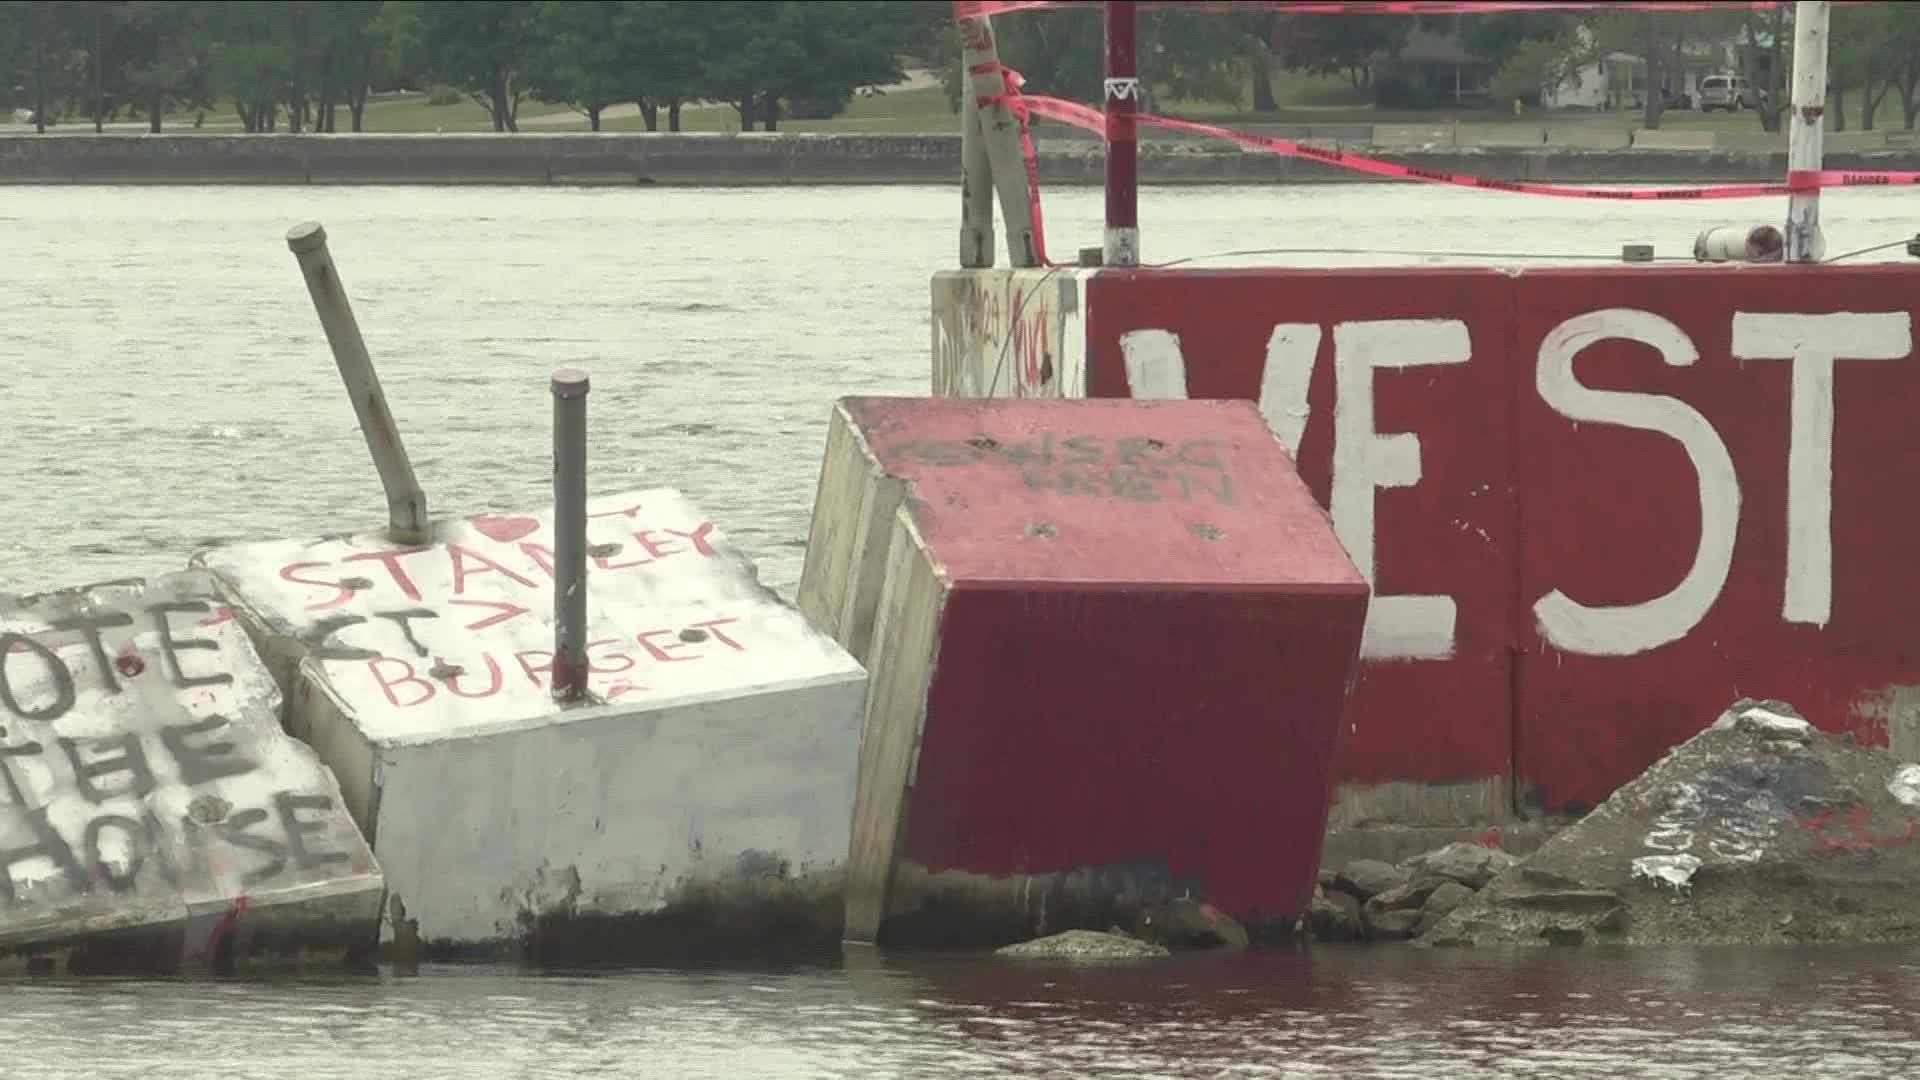 The Bird Island Pier, which runs along the start of the Niagara River, was badly damaged during a storm in 2019.